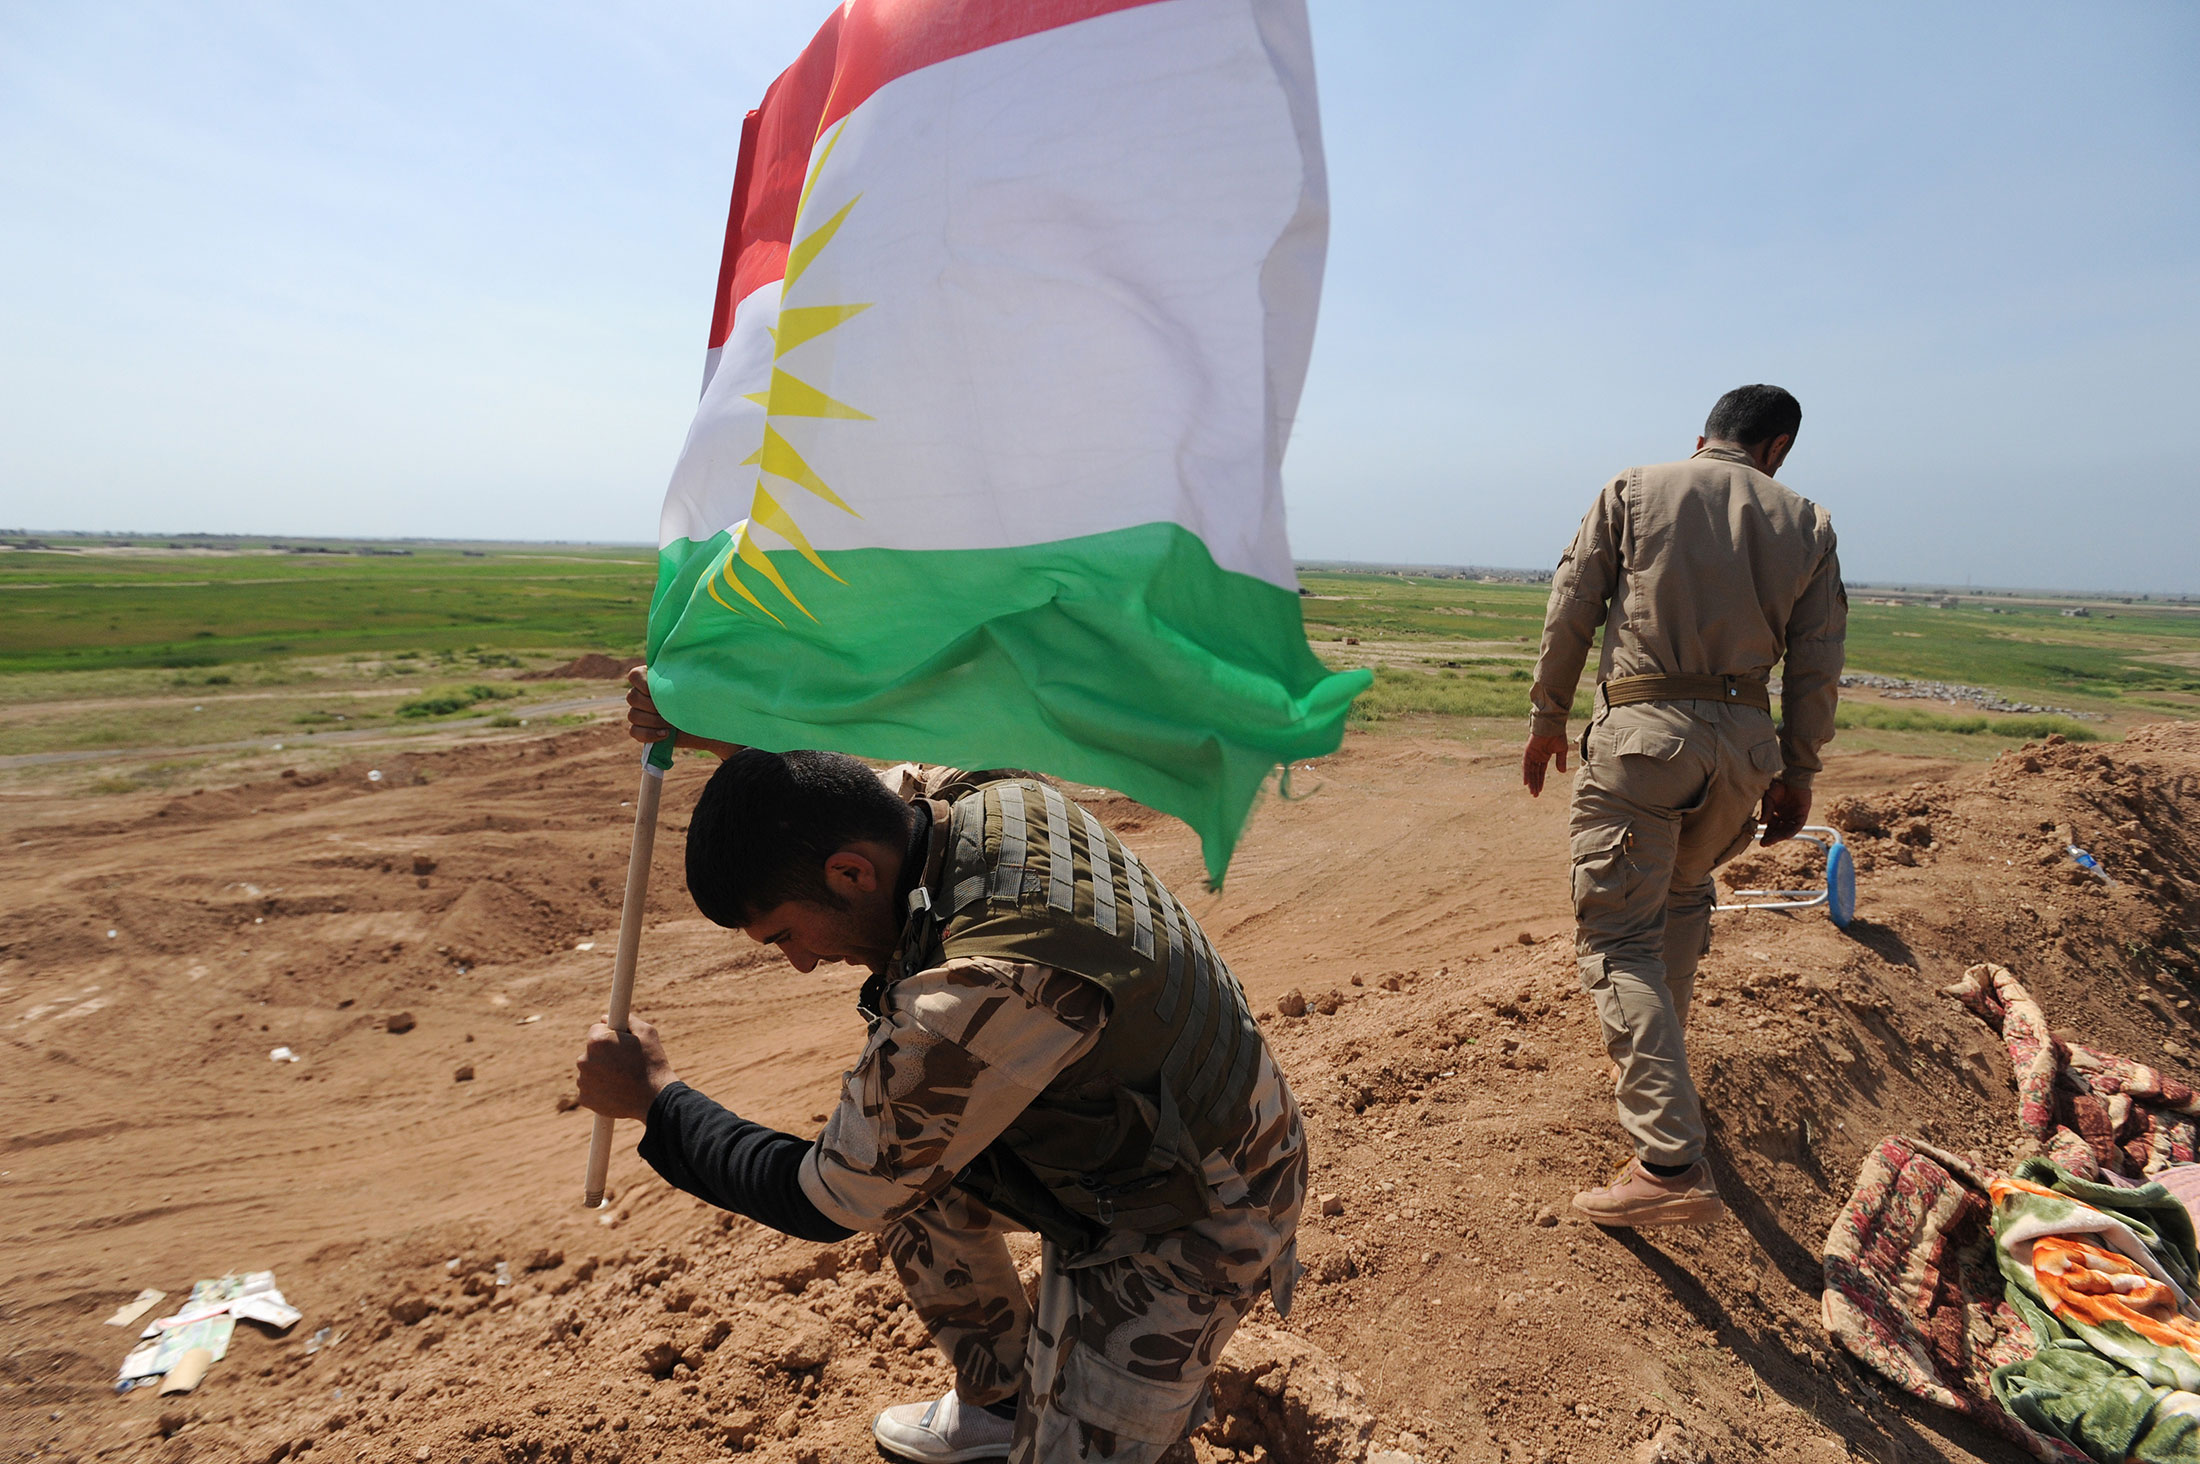 Kurdistan independence: Iraq may split and its oil could start war